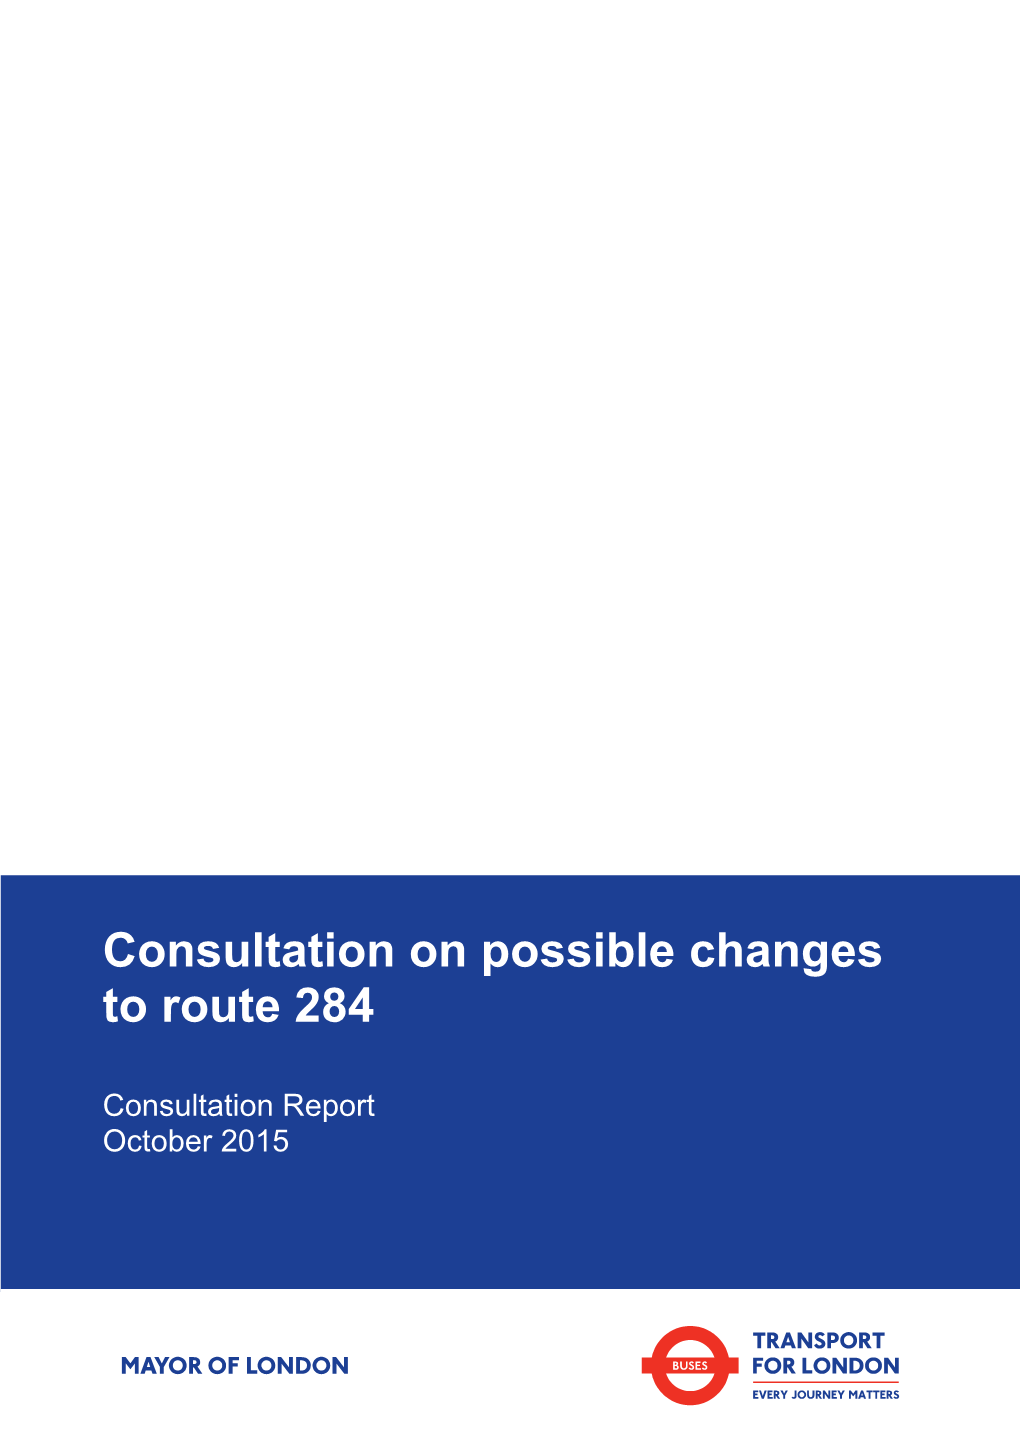 Consultation on Possible Changes to Route 284